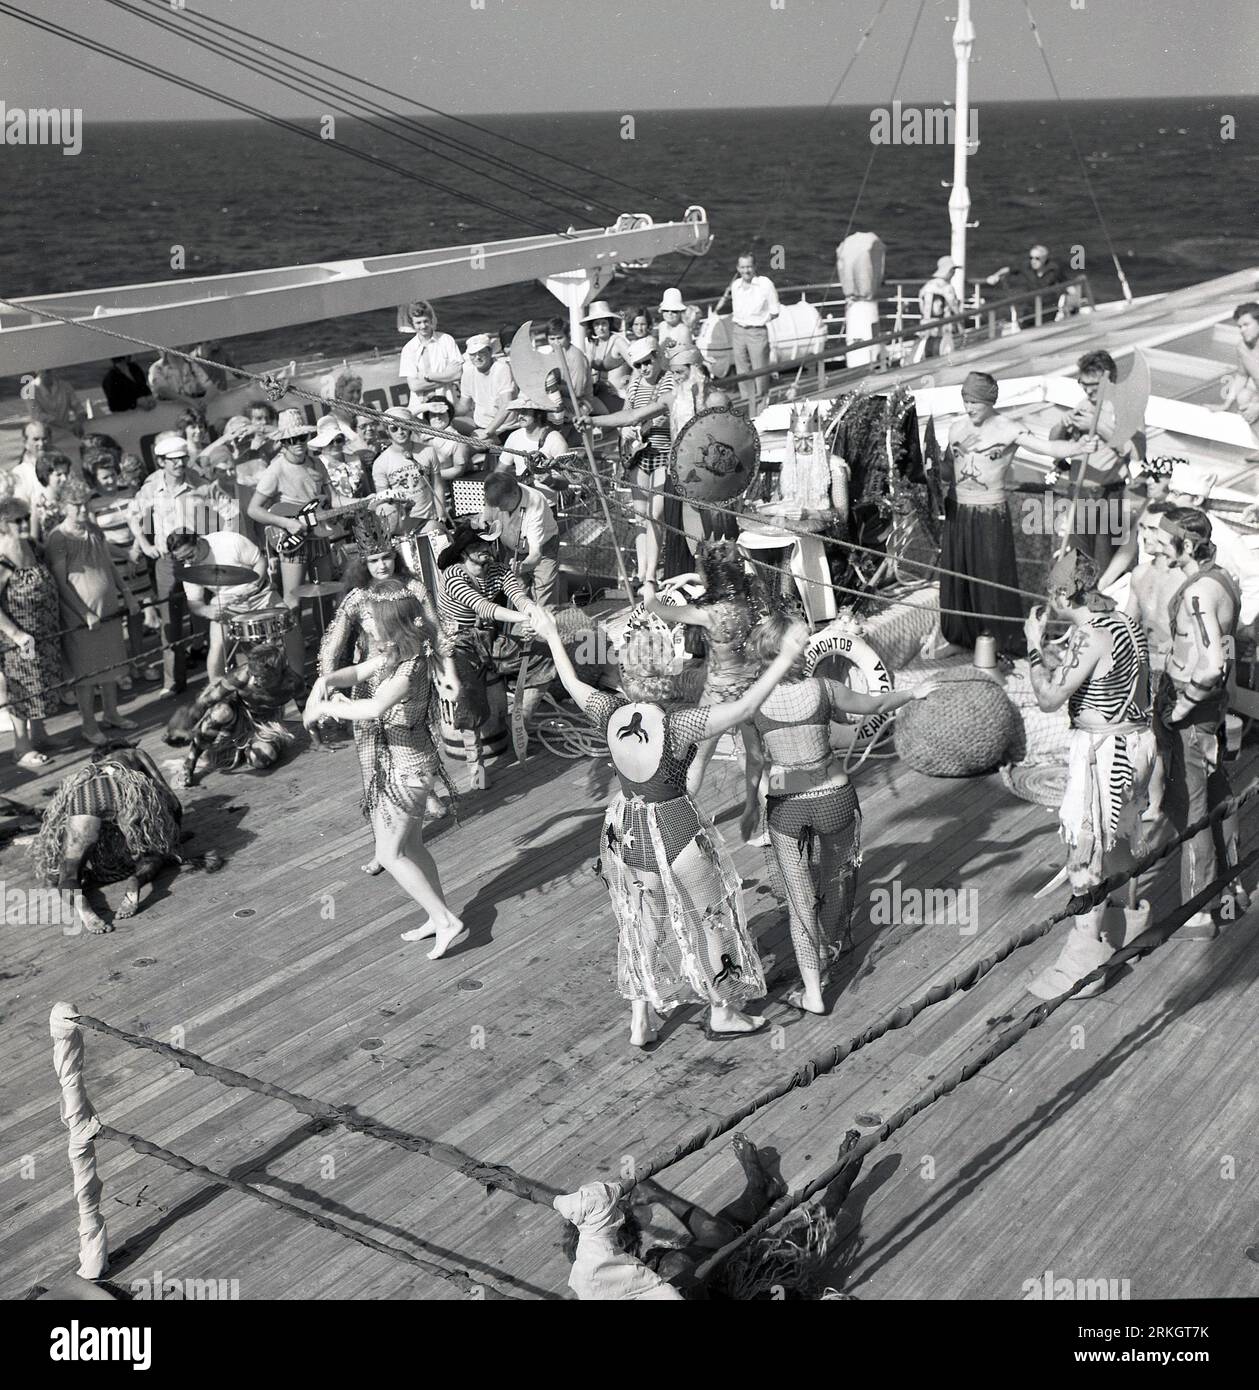 Late 1960s, historical, cruise passengers taking part in the traditional 'crossing the line ceremony', an initiation rite that commemorates a person's first crossing of the equator. Sailors who have crossed the equator are known Shellbacks or Sons of Neptune. Stock Photo